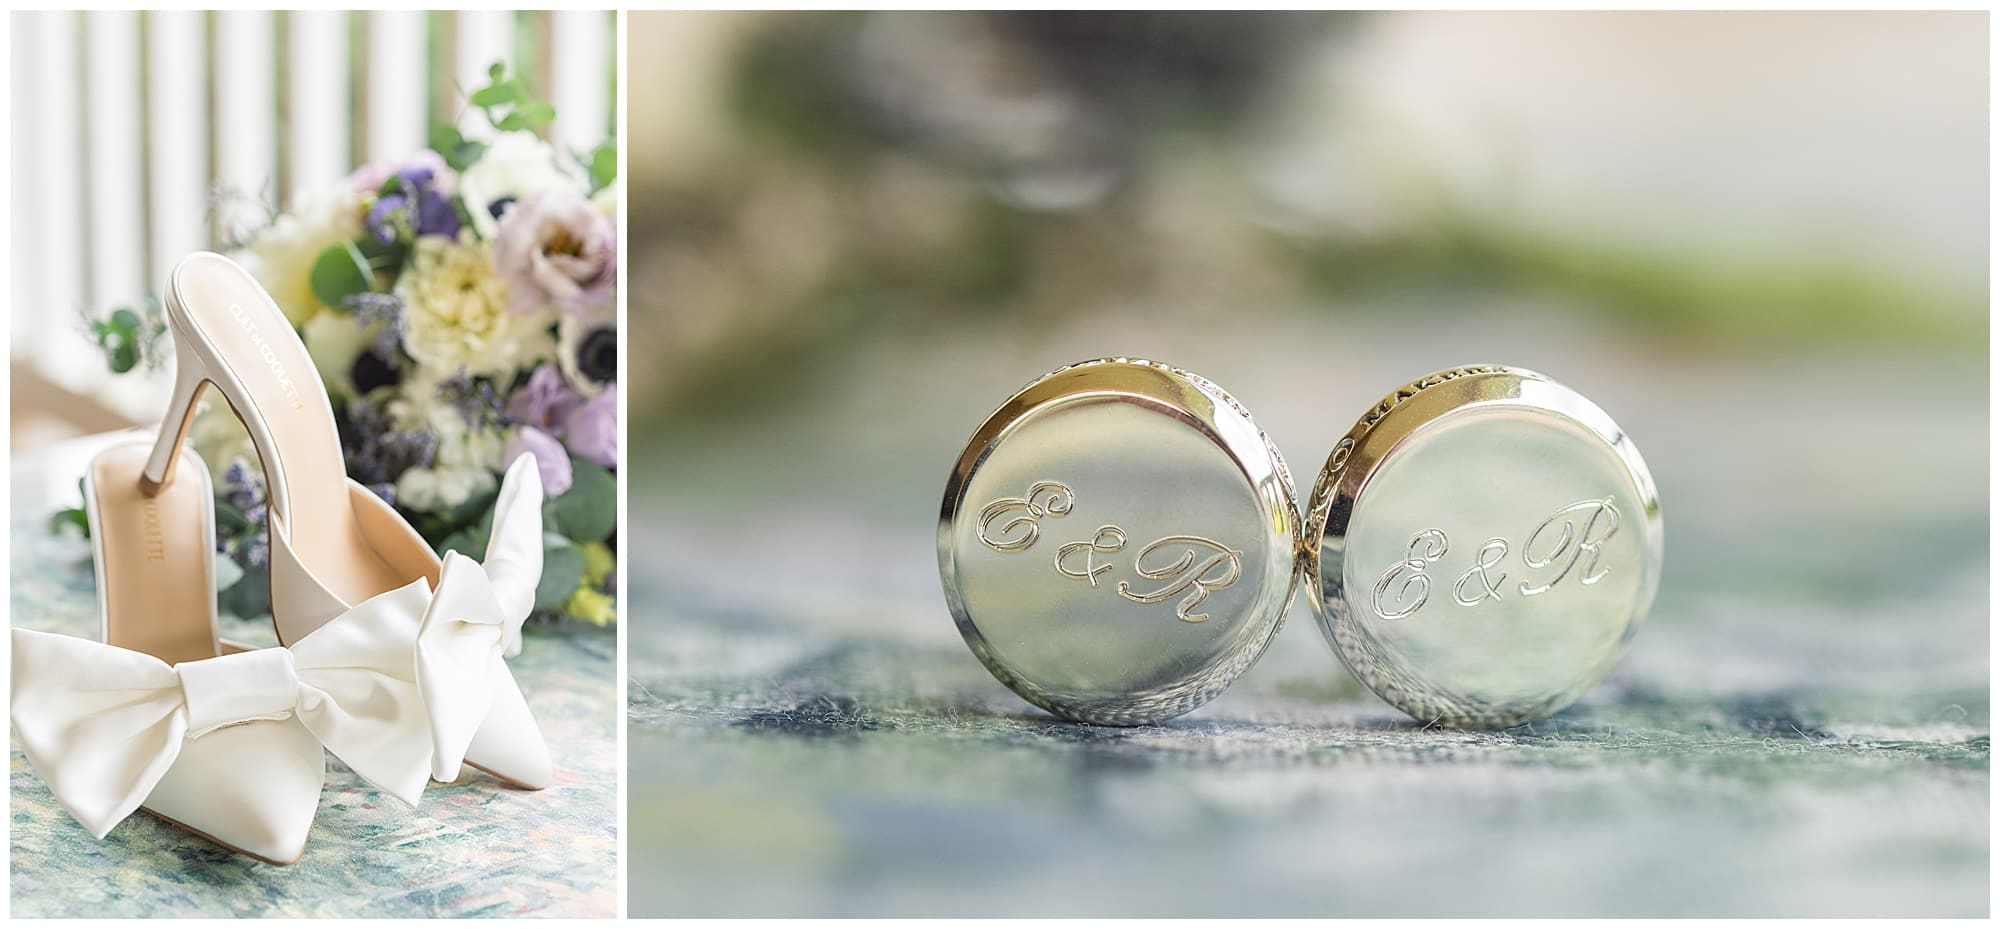 Brides shoes and grooms monogrammed cuff links with their initials